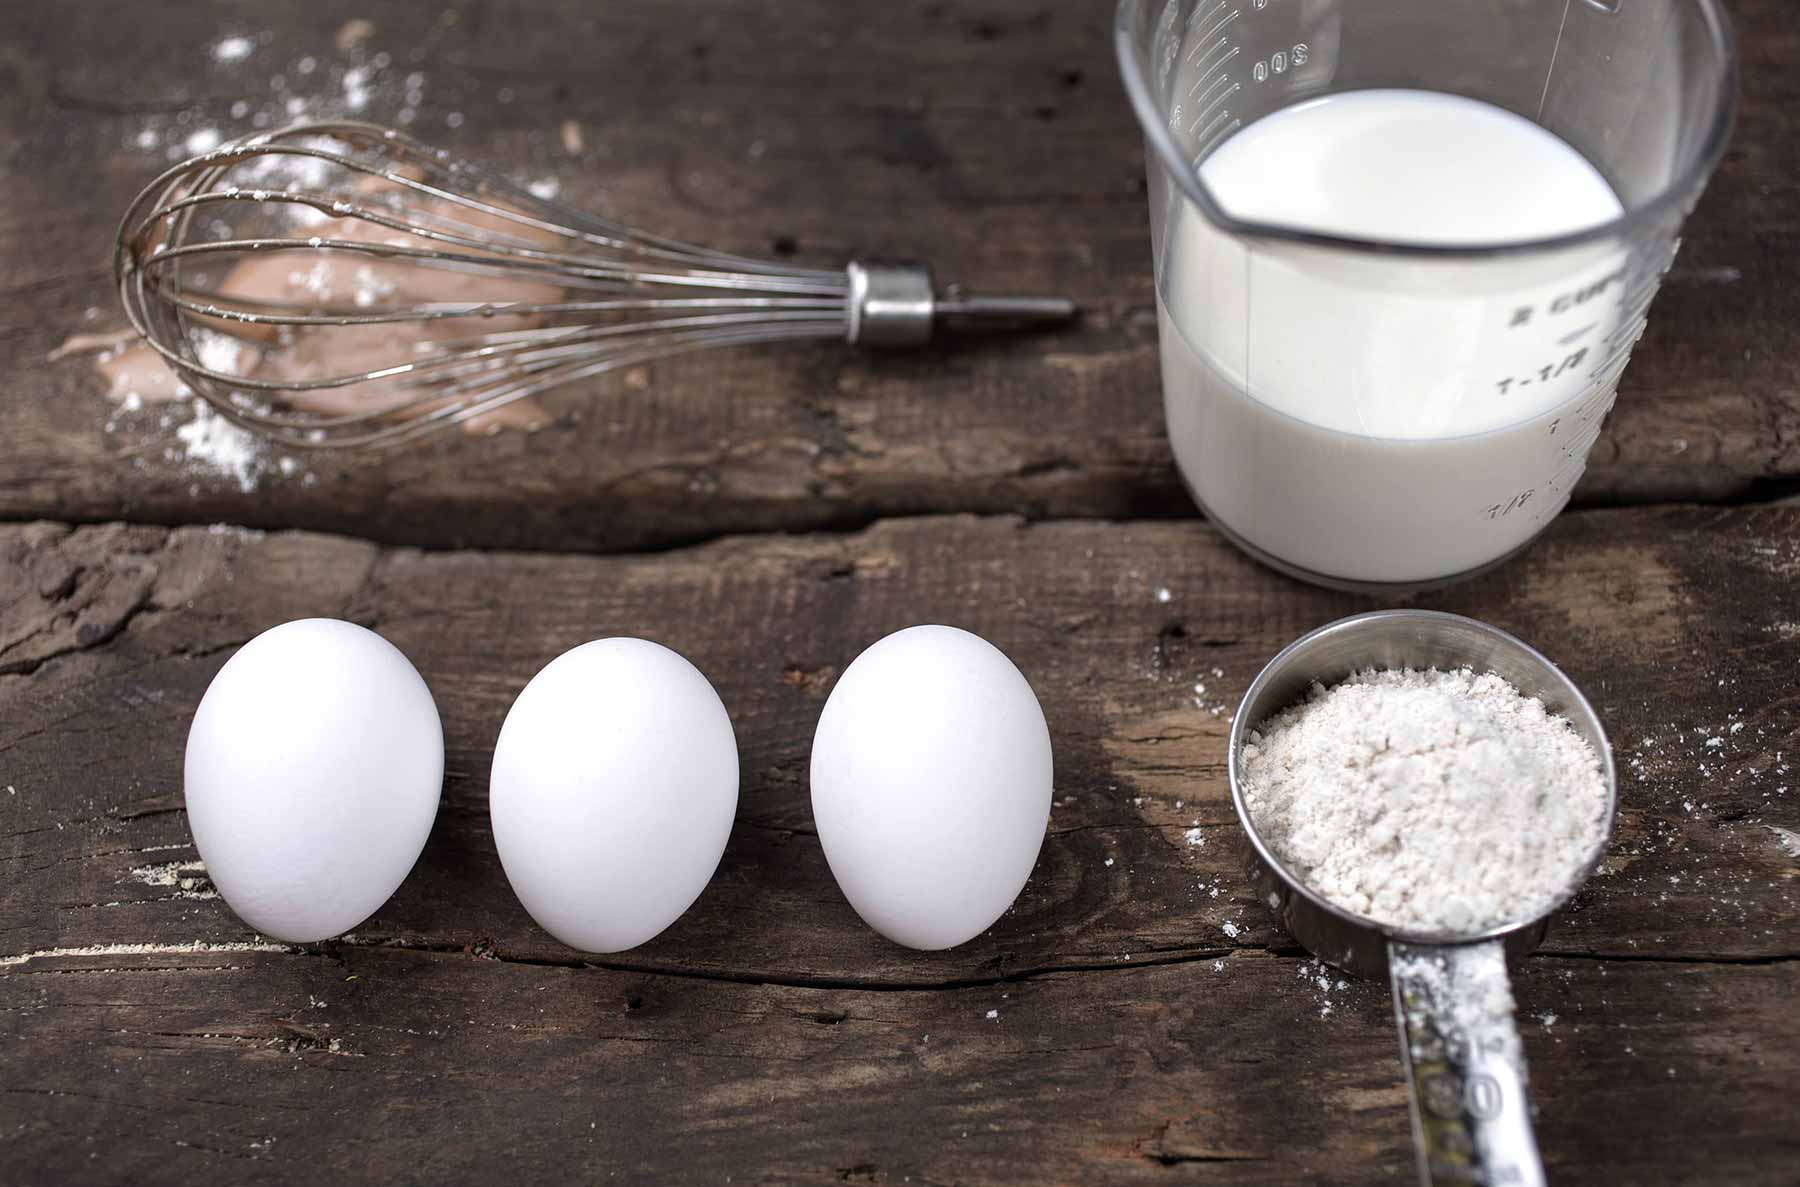 How to Bring Butter, Eggs & Dairy to Room Temperature Quickly